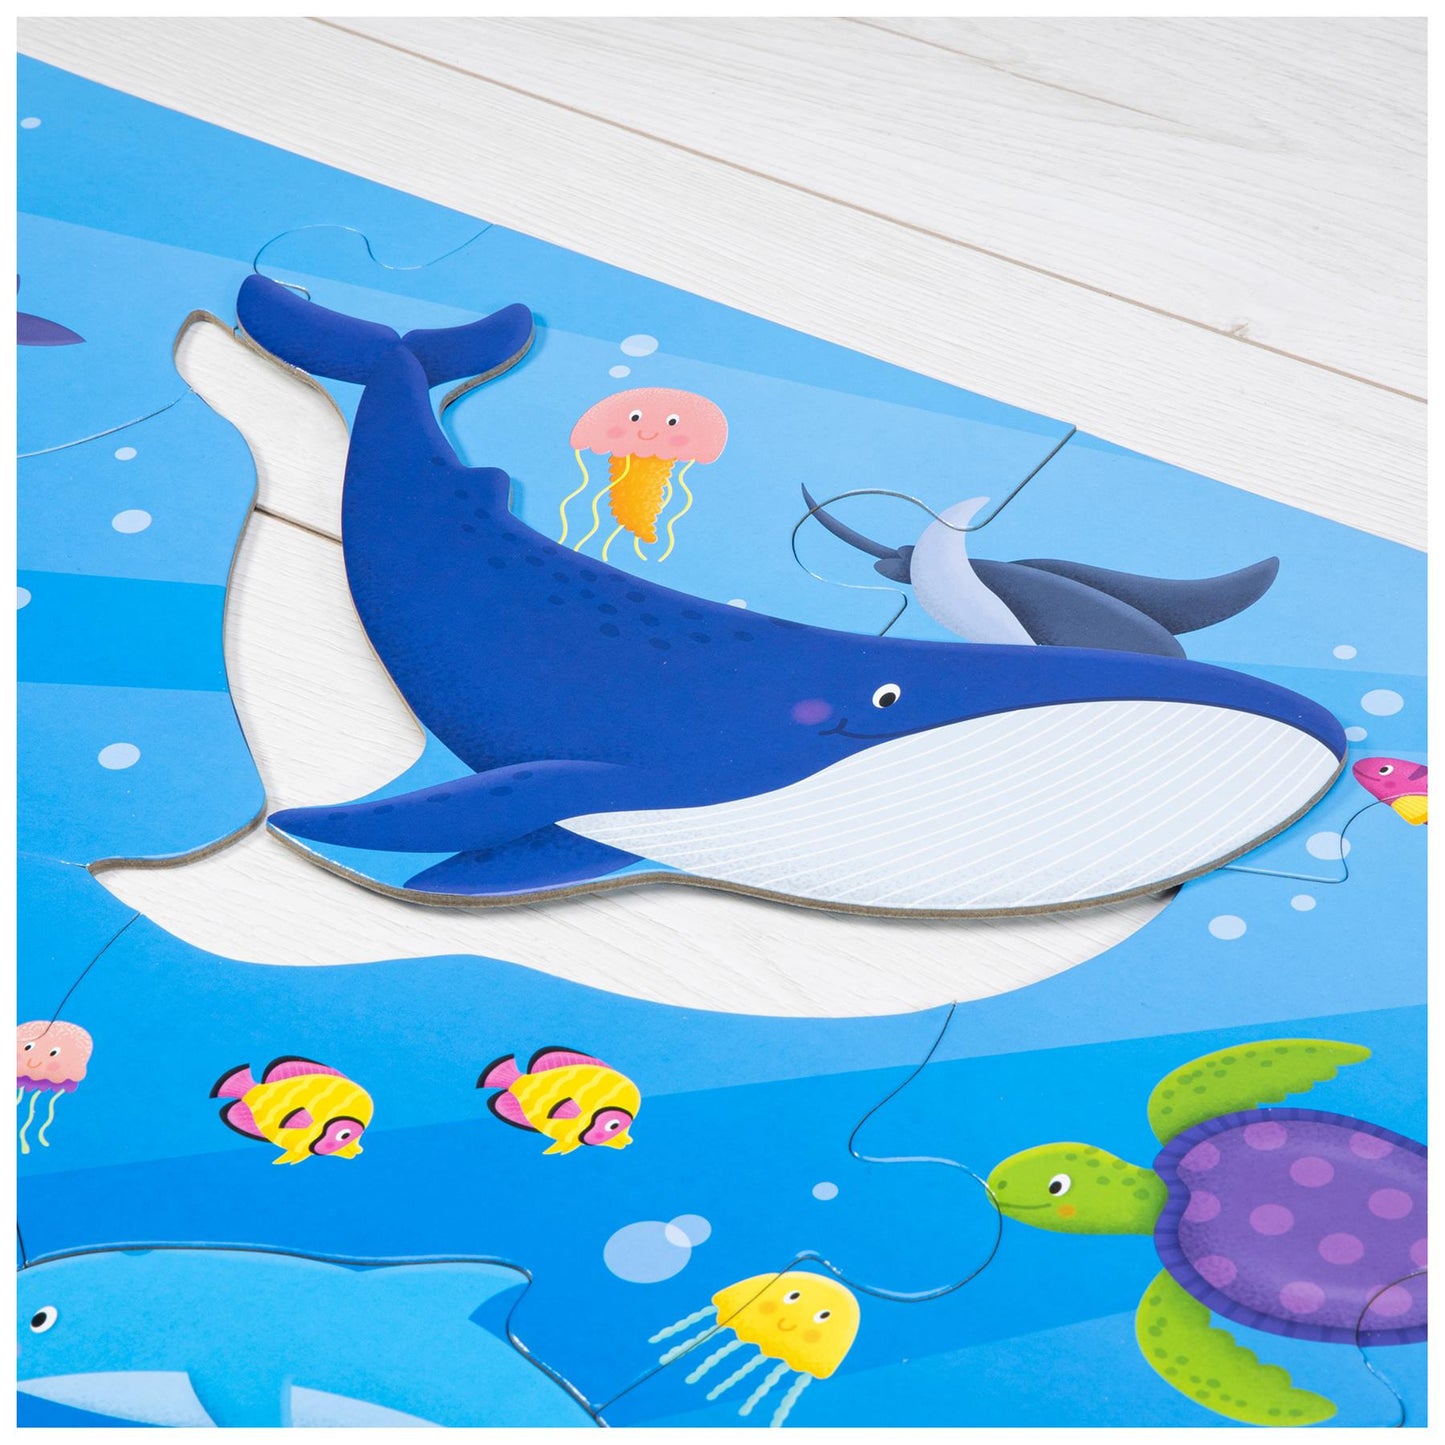 Counting Creatures  30 Piece Giant Floor Jigsaw Puzzle